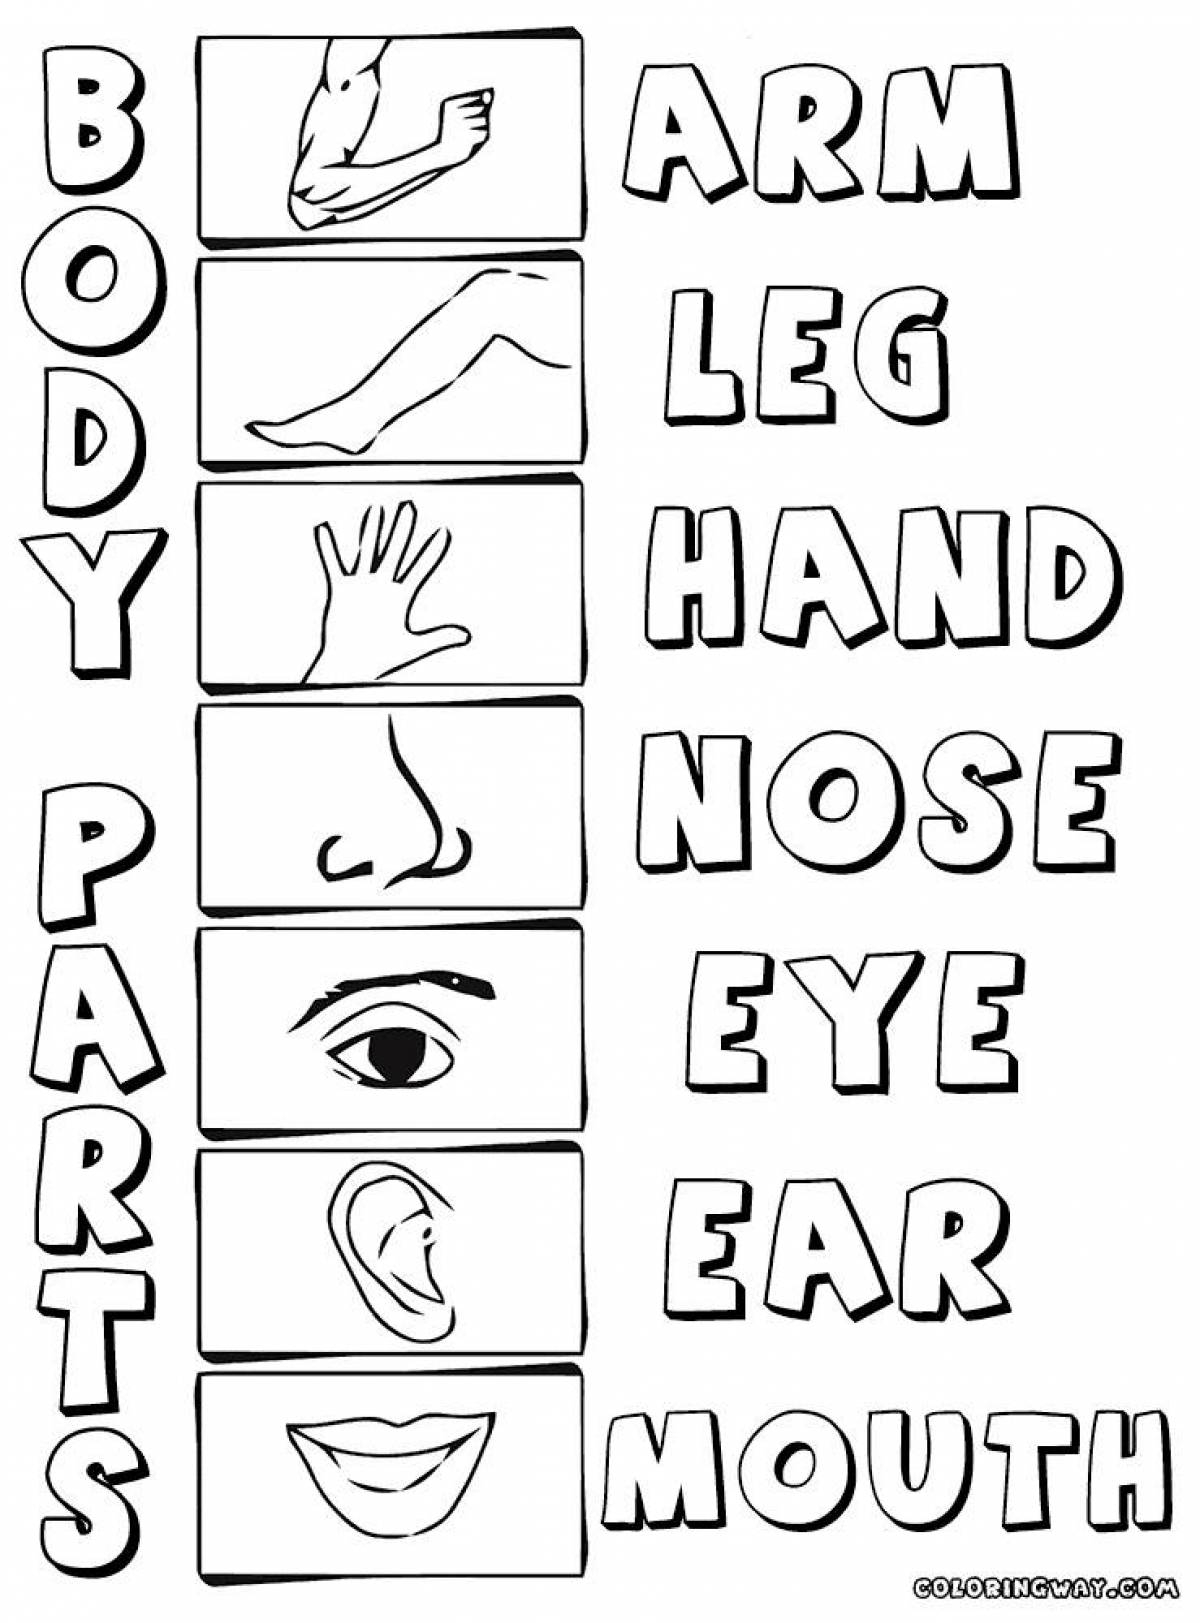 Fun body parts coloring for kids